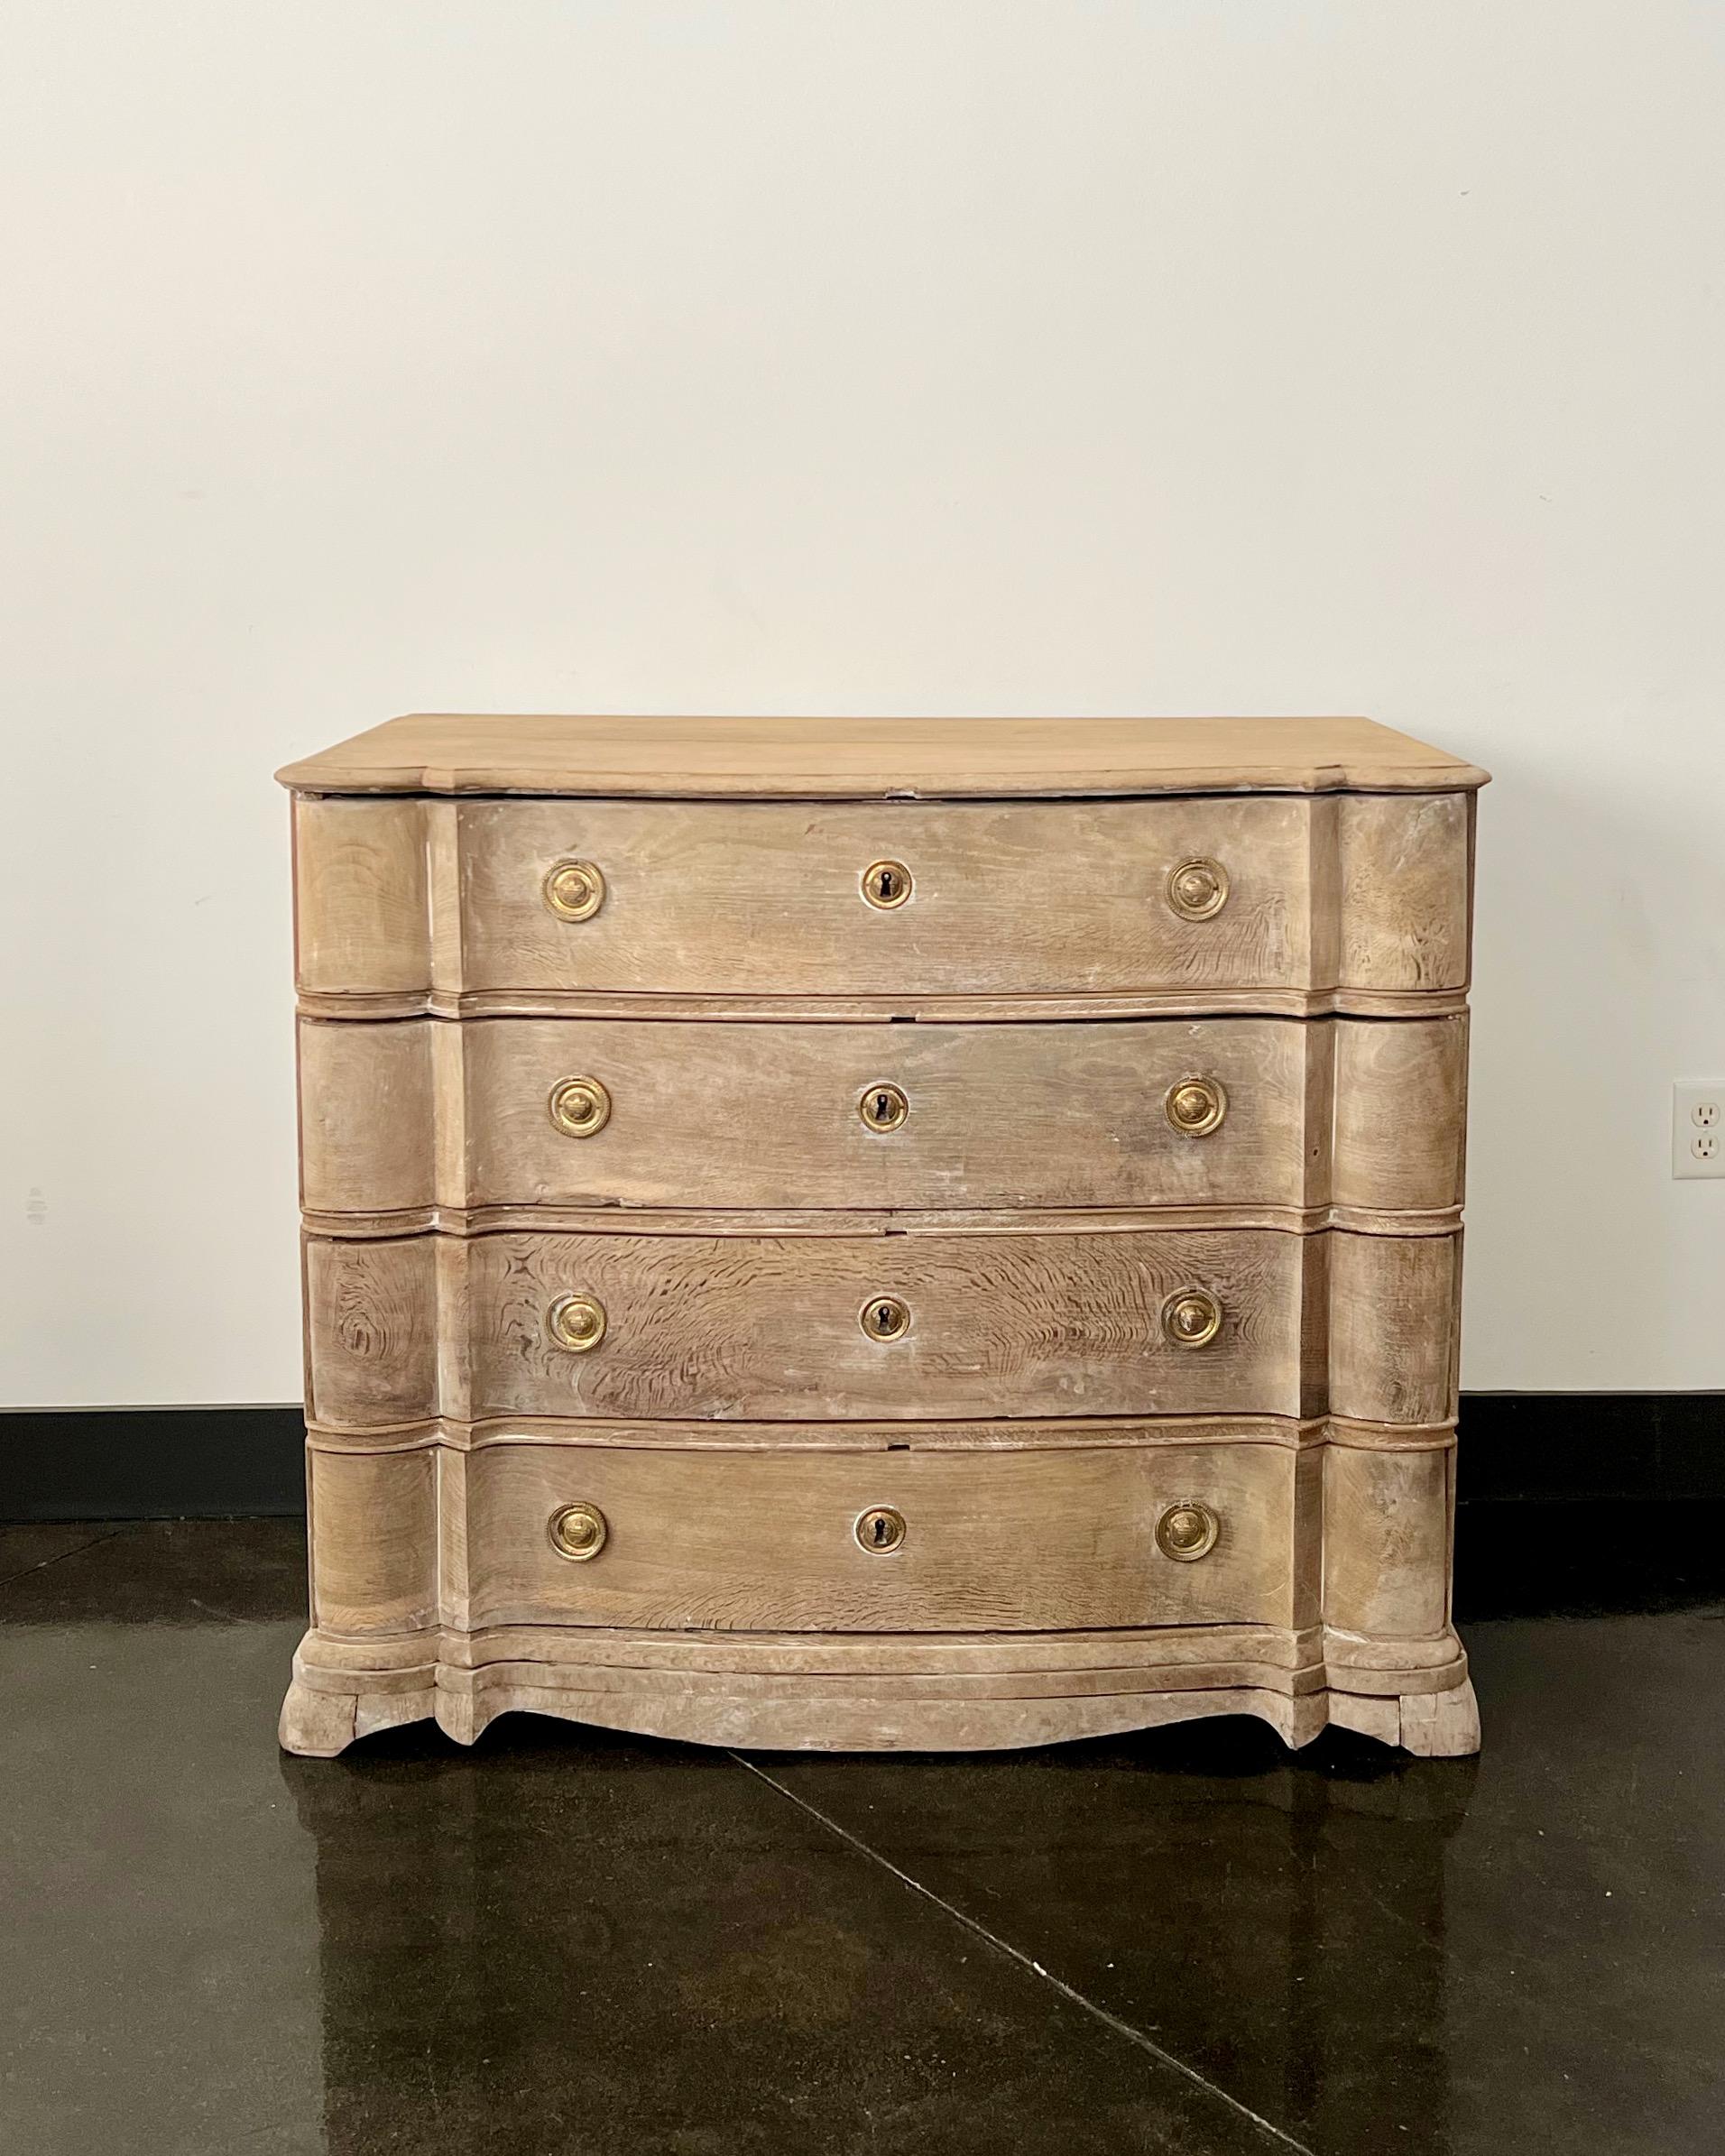 19th century chest of drawers in richly carved bleached oak with curvaceous serpentine drawer fronts with handsome original bronze hardwares and shaped top on carved bracket feet.
Denmark, circa 1850.
More than ever, we selected the best, the